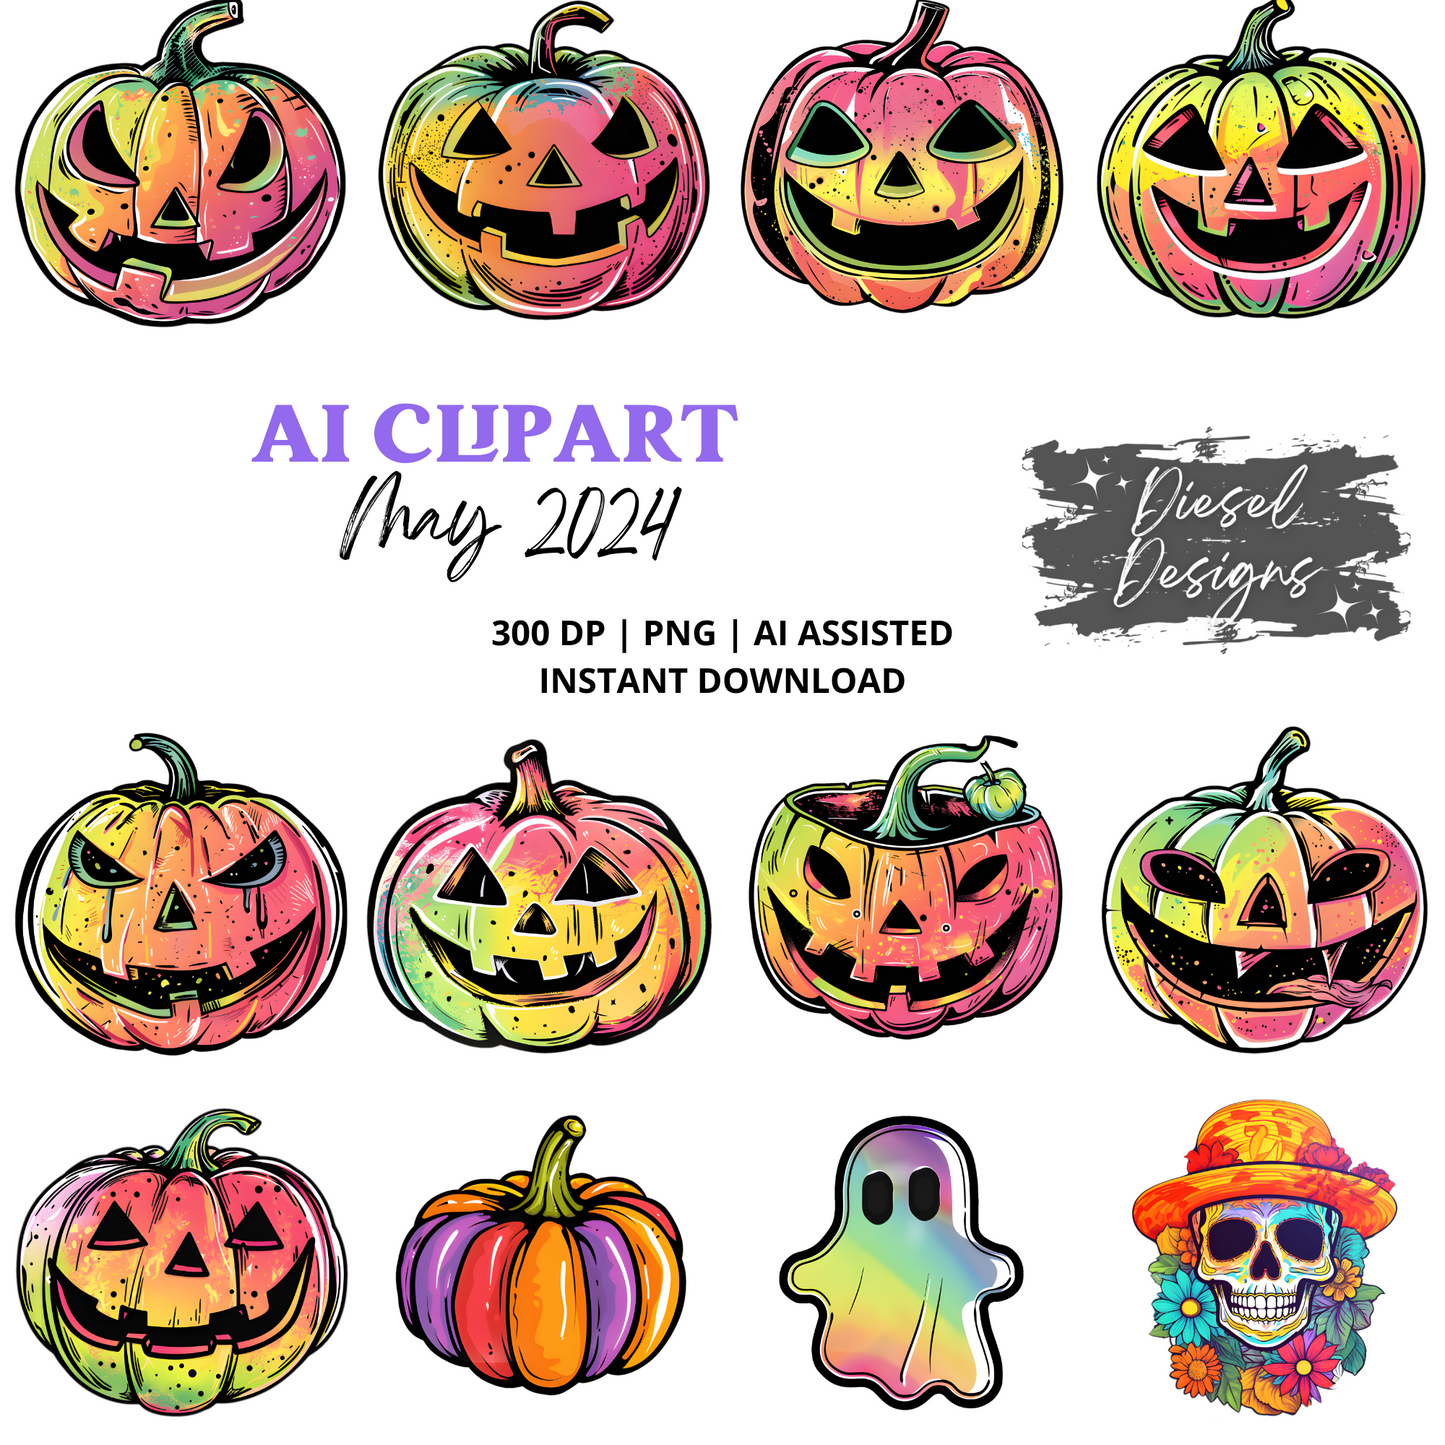 May 2024 Clipart Drive - AI Assisted | 300 DPI | Transparent PNG | Clipart